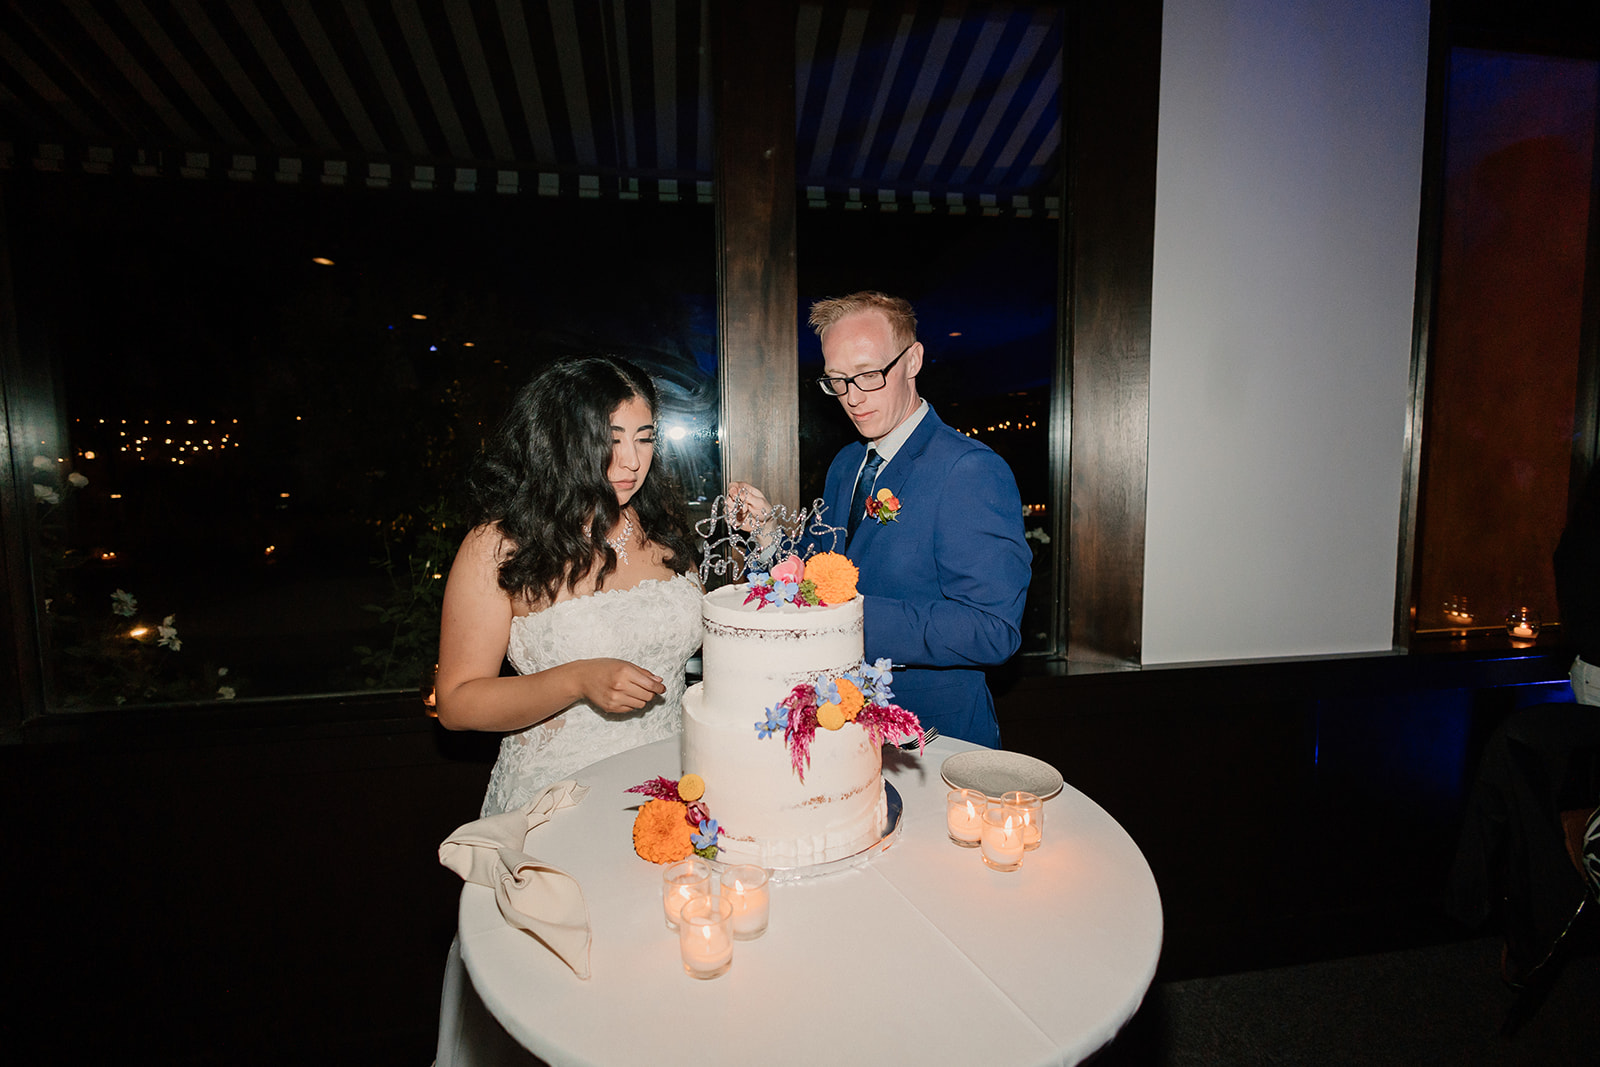 A bride and groom smiling as they cut a wedding cake together at an evening reception.